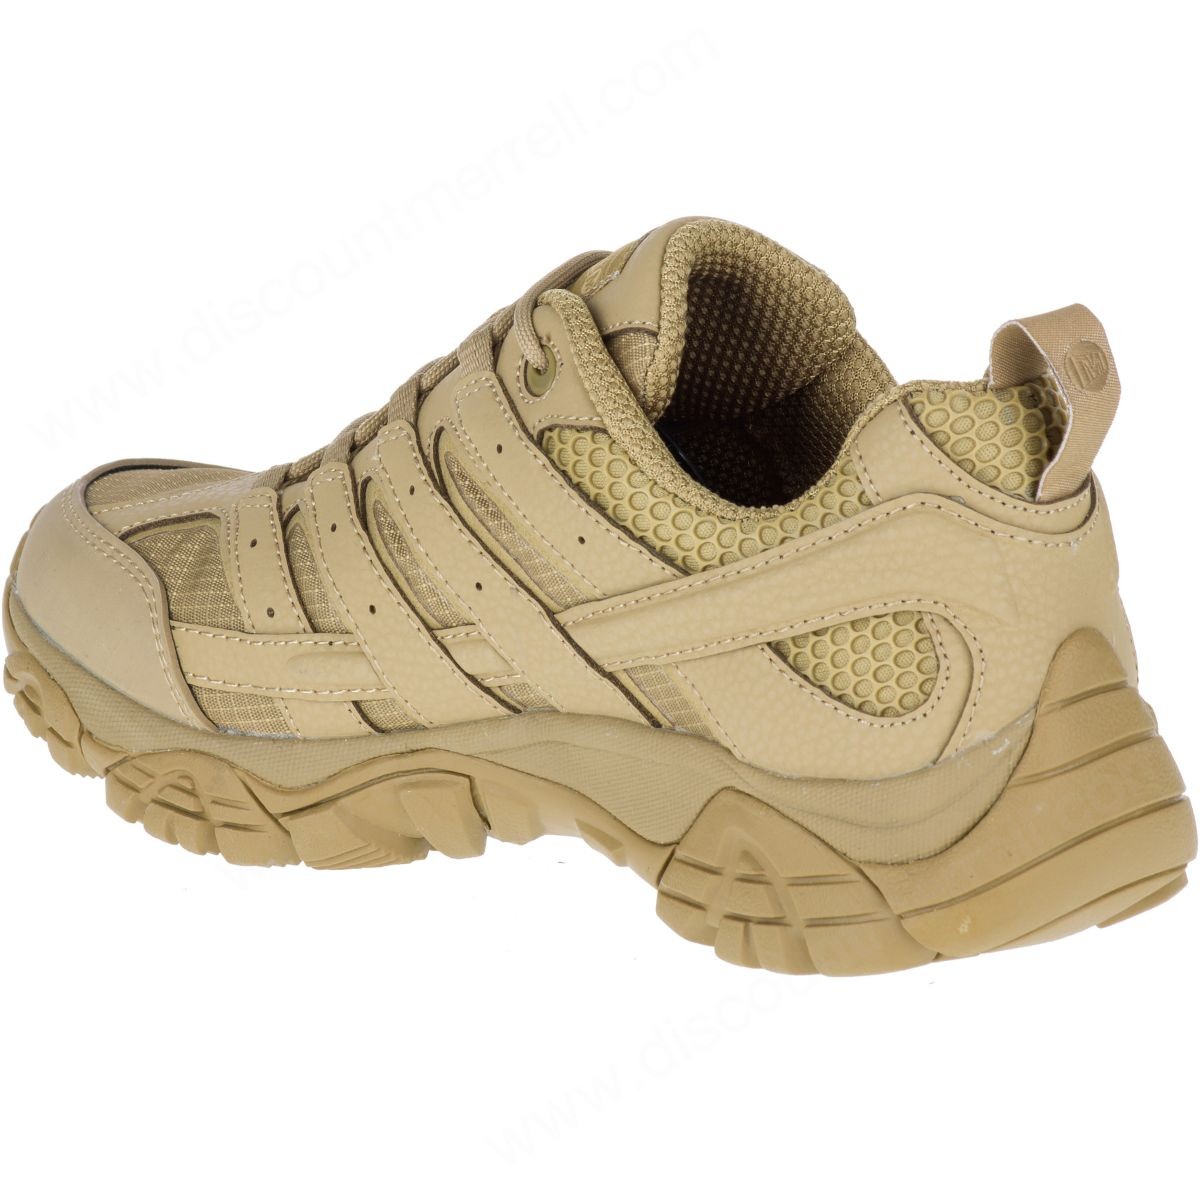 Merrell Woman's Moab Tactical Sneaker Coyote - -6